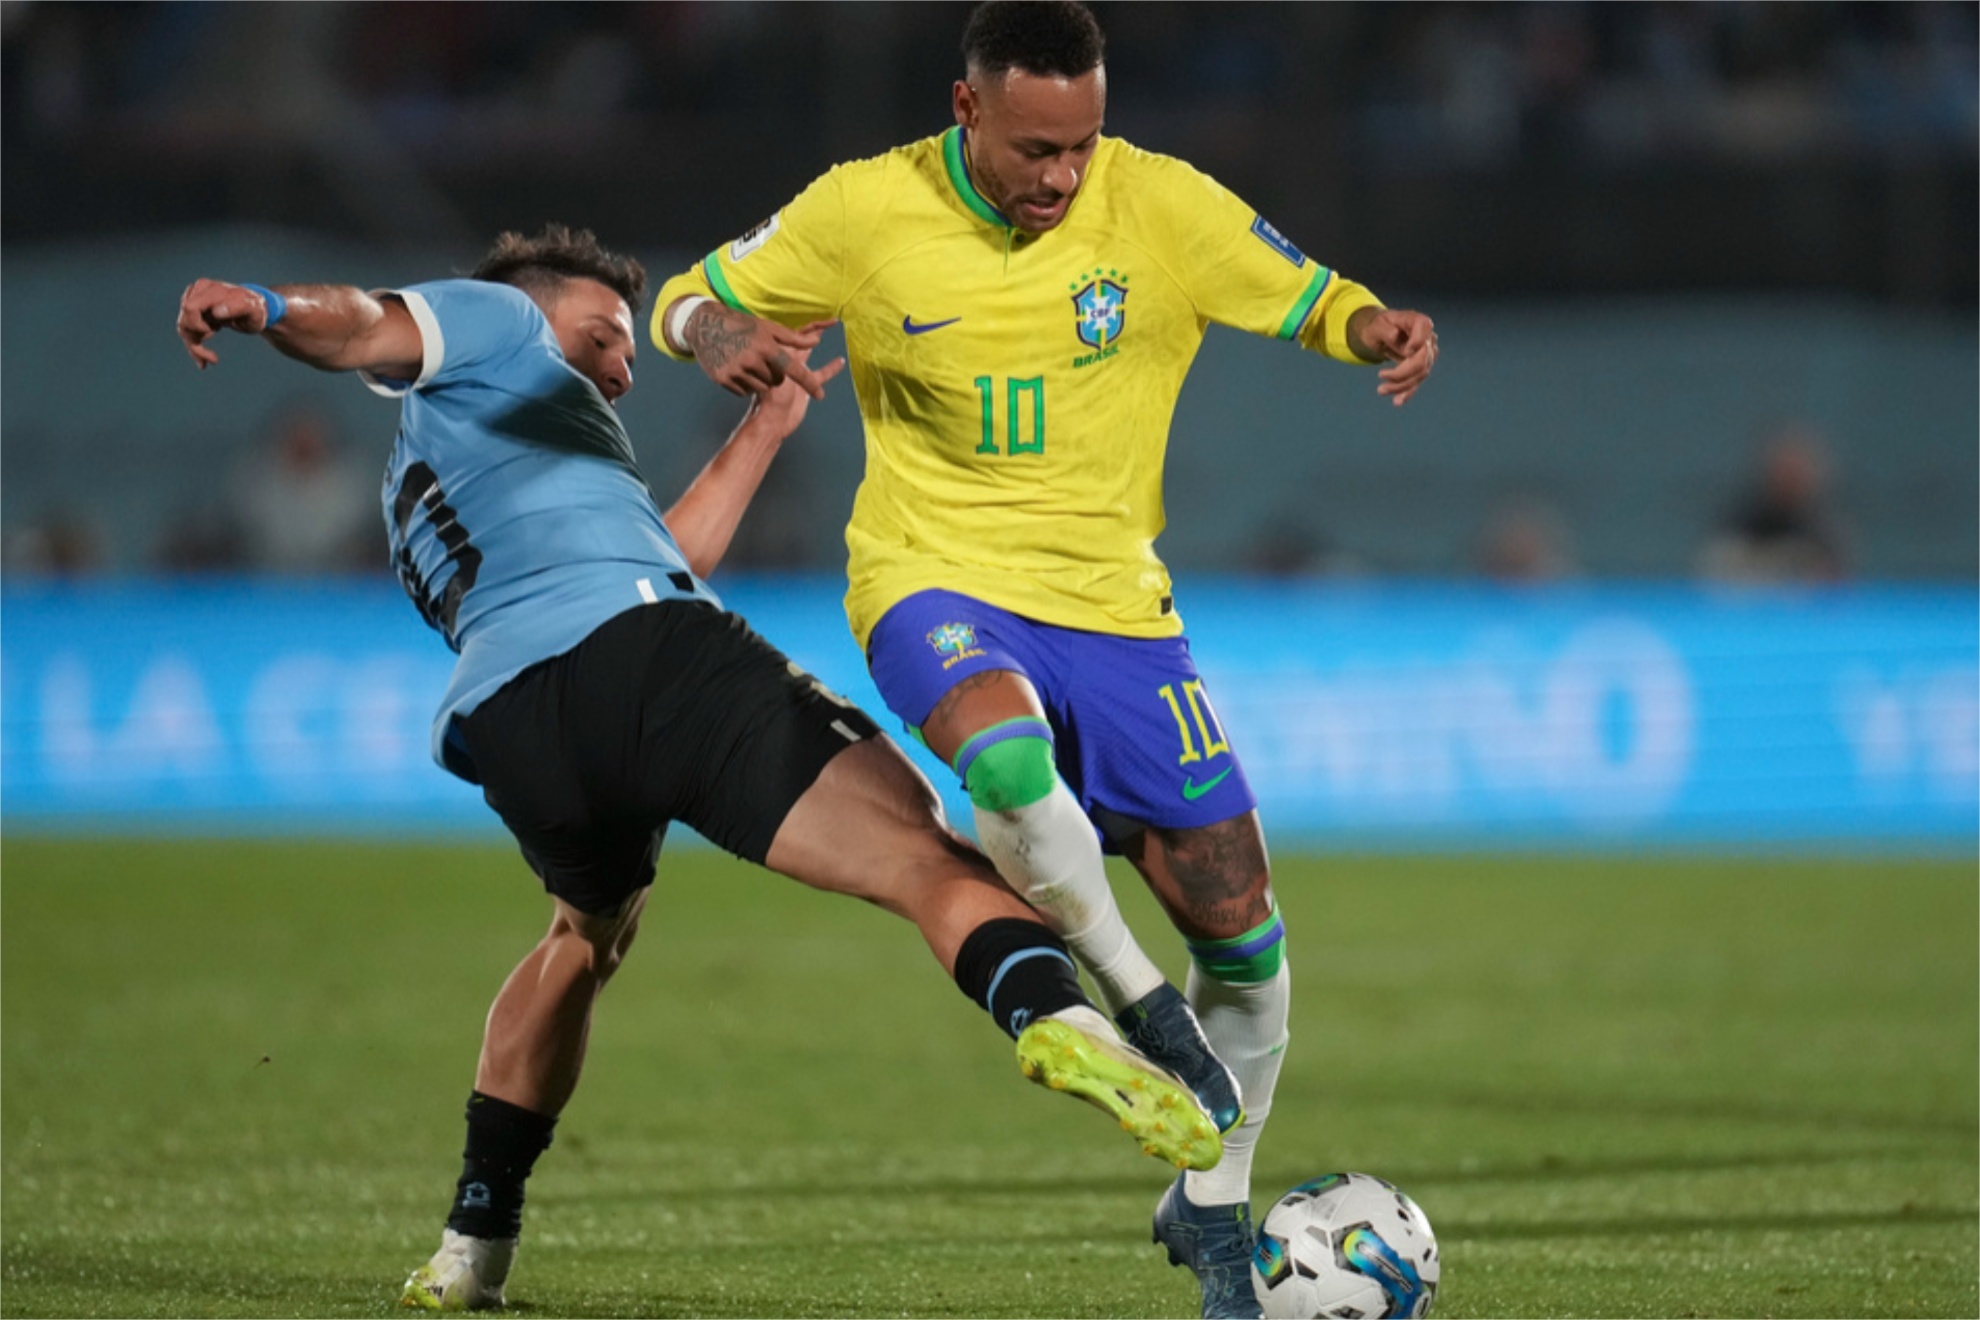 Neymar got injured in Brazil's WC qulaifier game against Uruguay on Tuesday